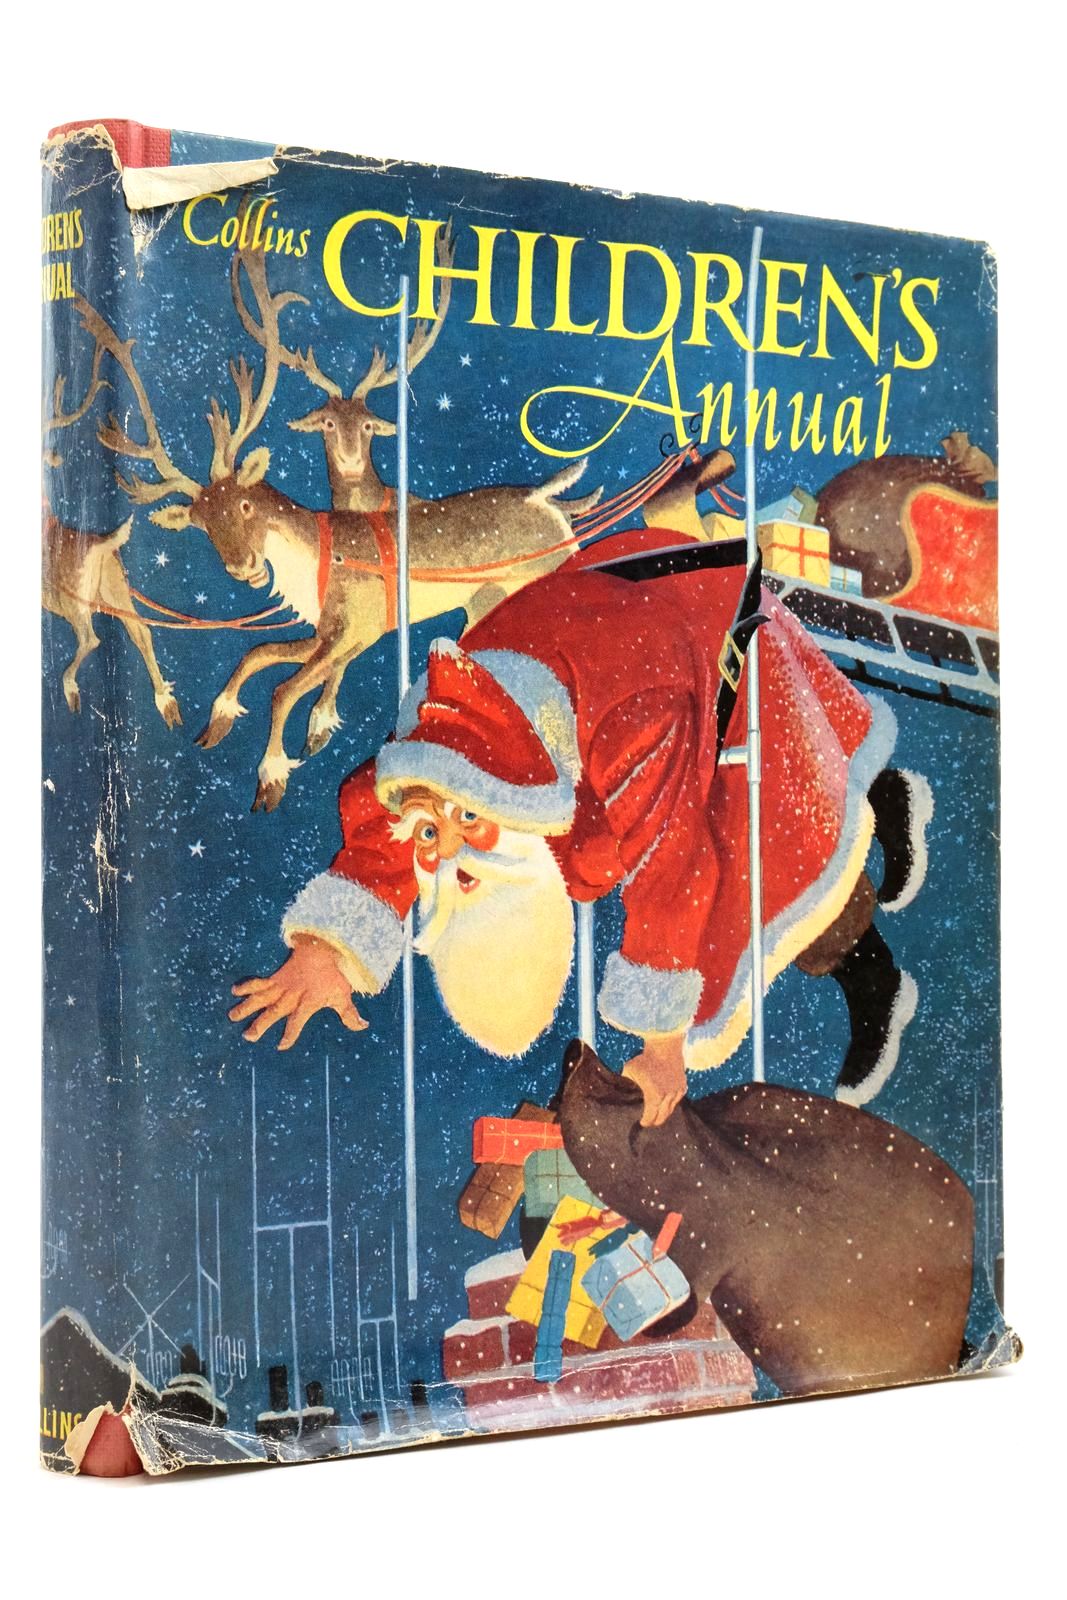 Photo of COLLINS CHILDREN'S ANNUAL- Stock Number: 2138901